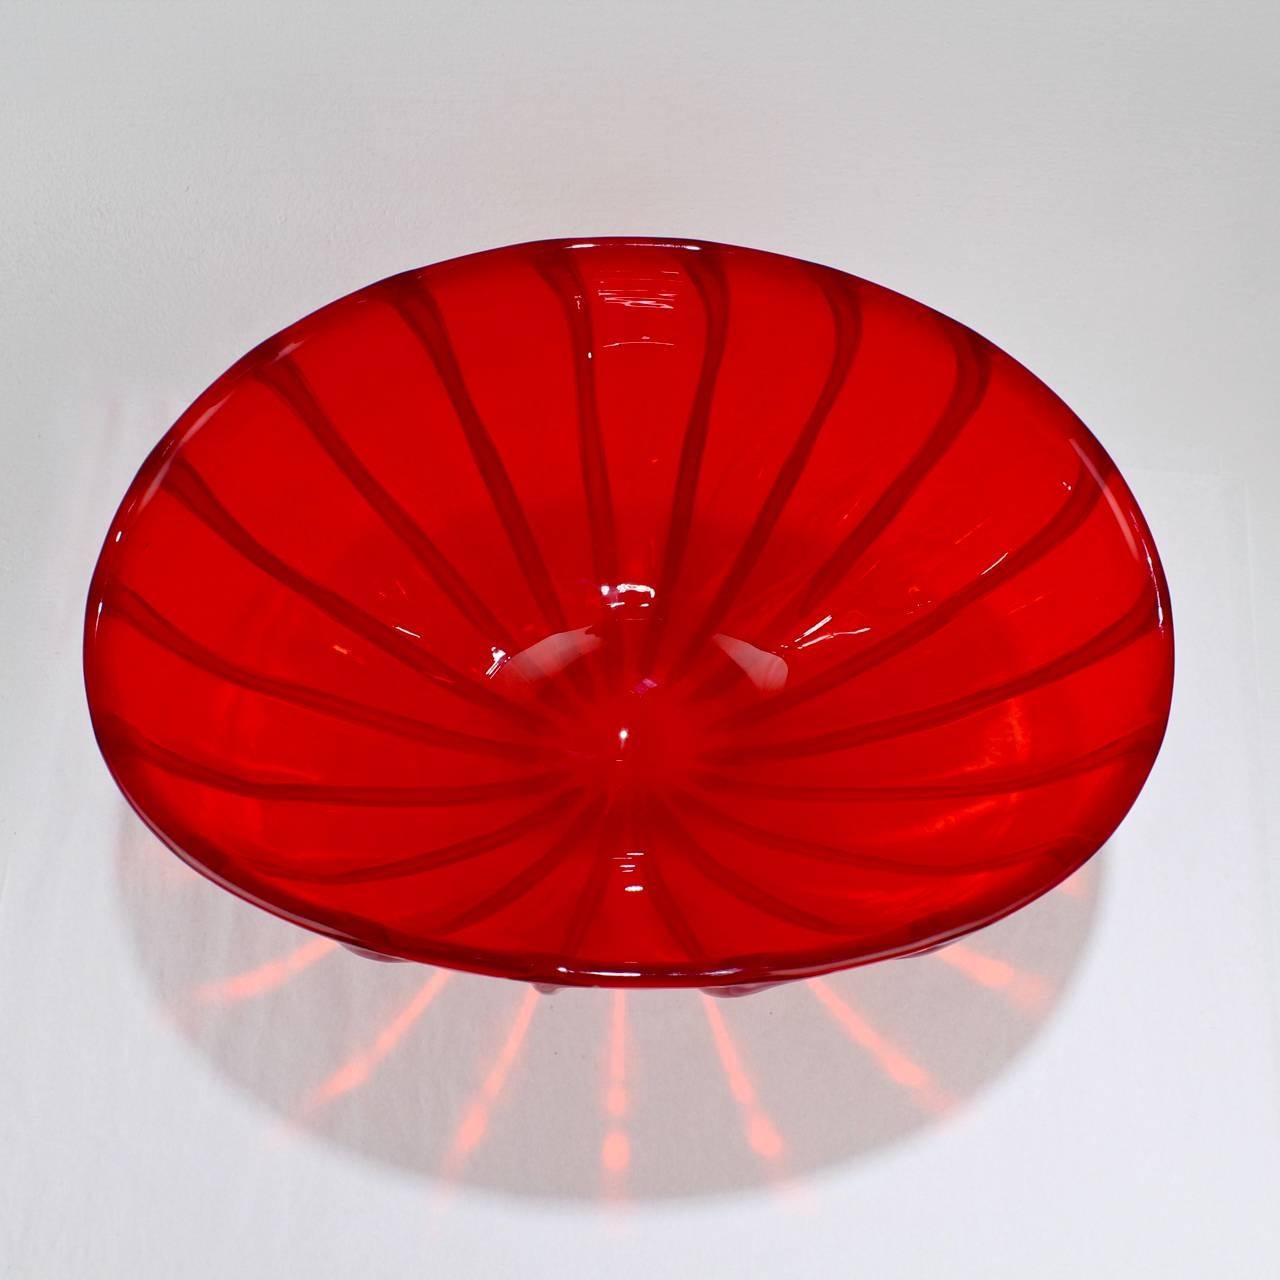 Seguso Viro Limited Edition Nuance Collection Red Murano Glass Vase or Bowl 2